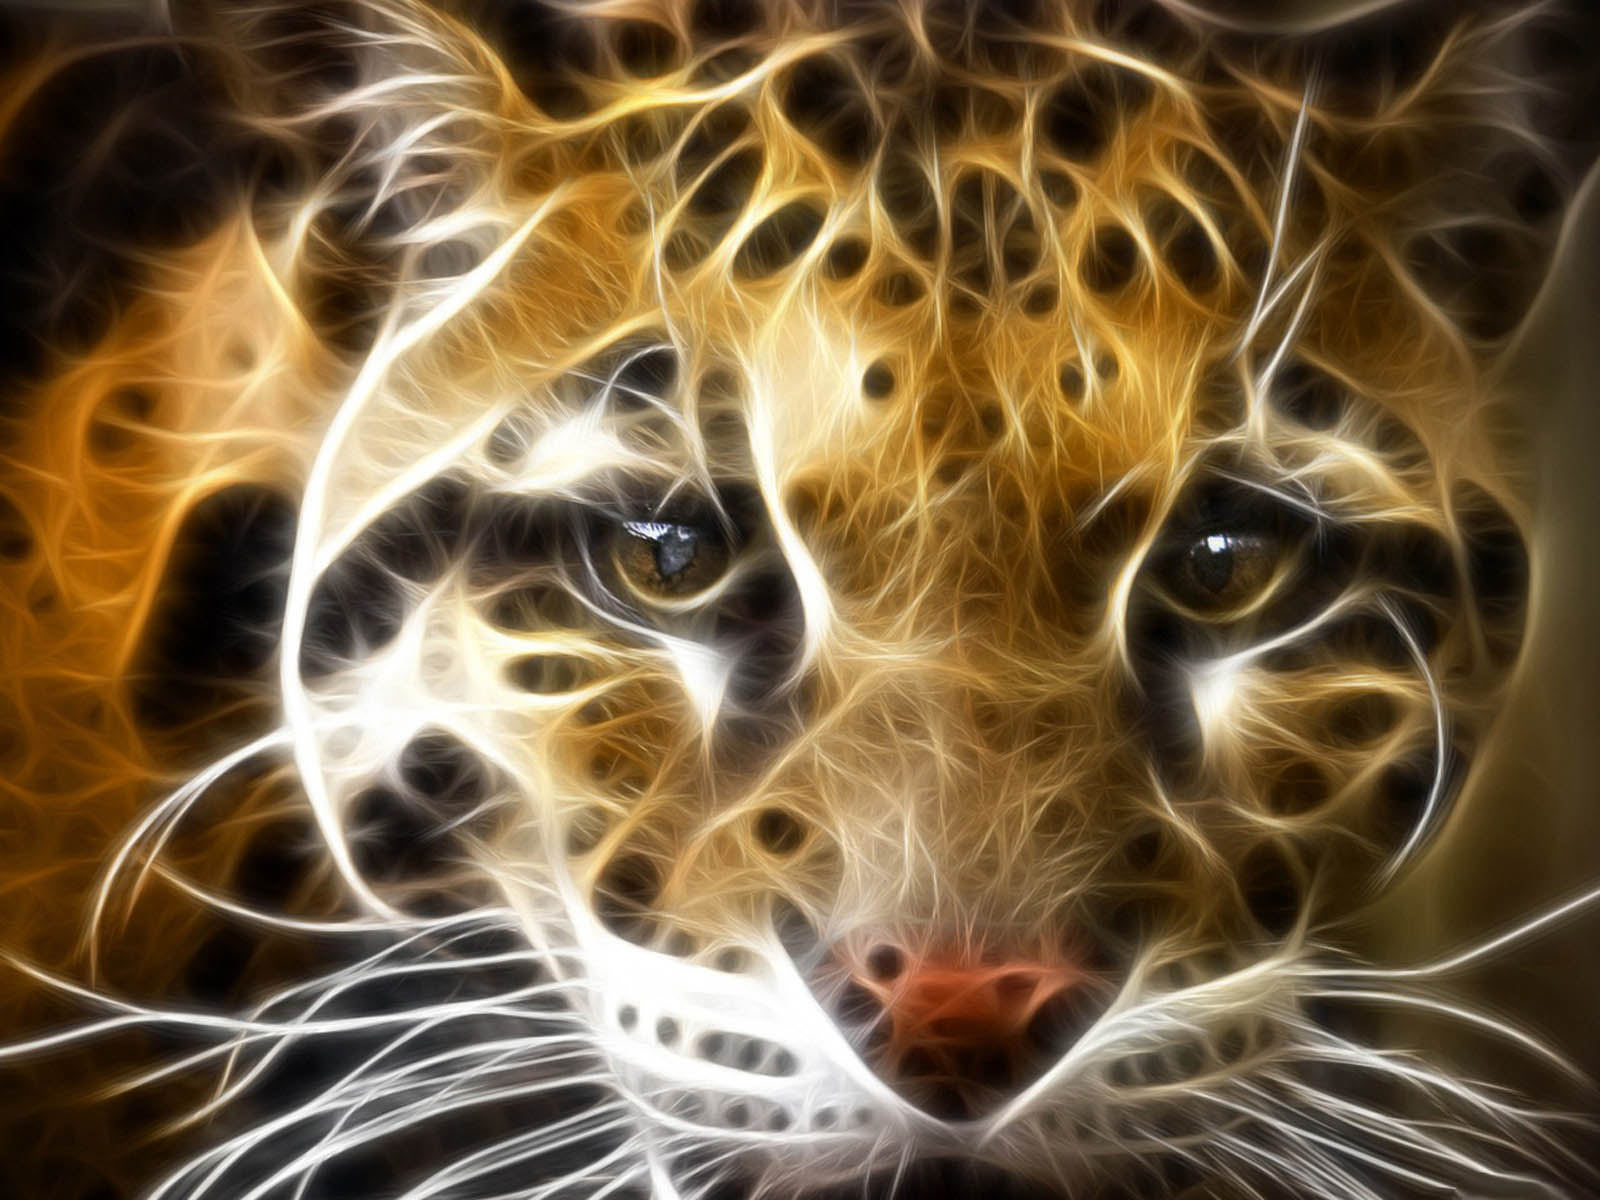 Tag Tiger 3d Wallpaper Image Photos Pictures And Background For